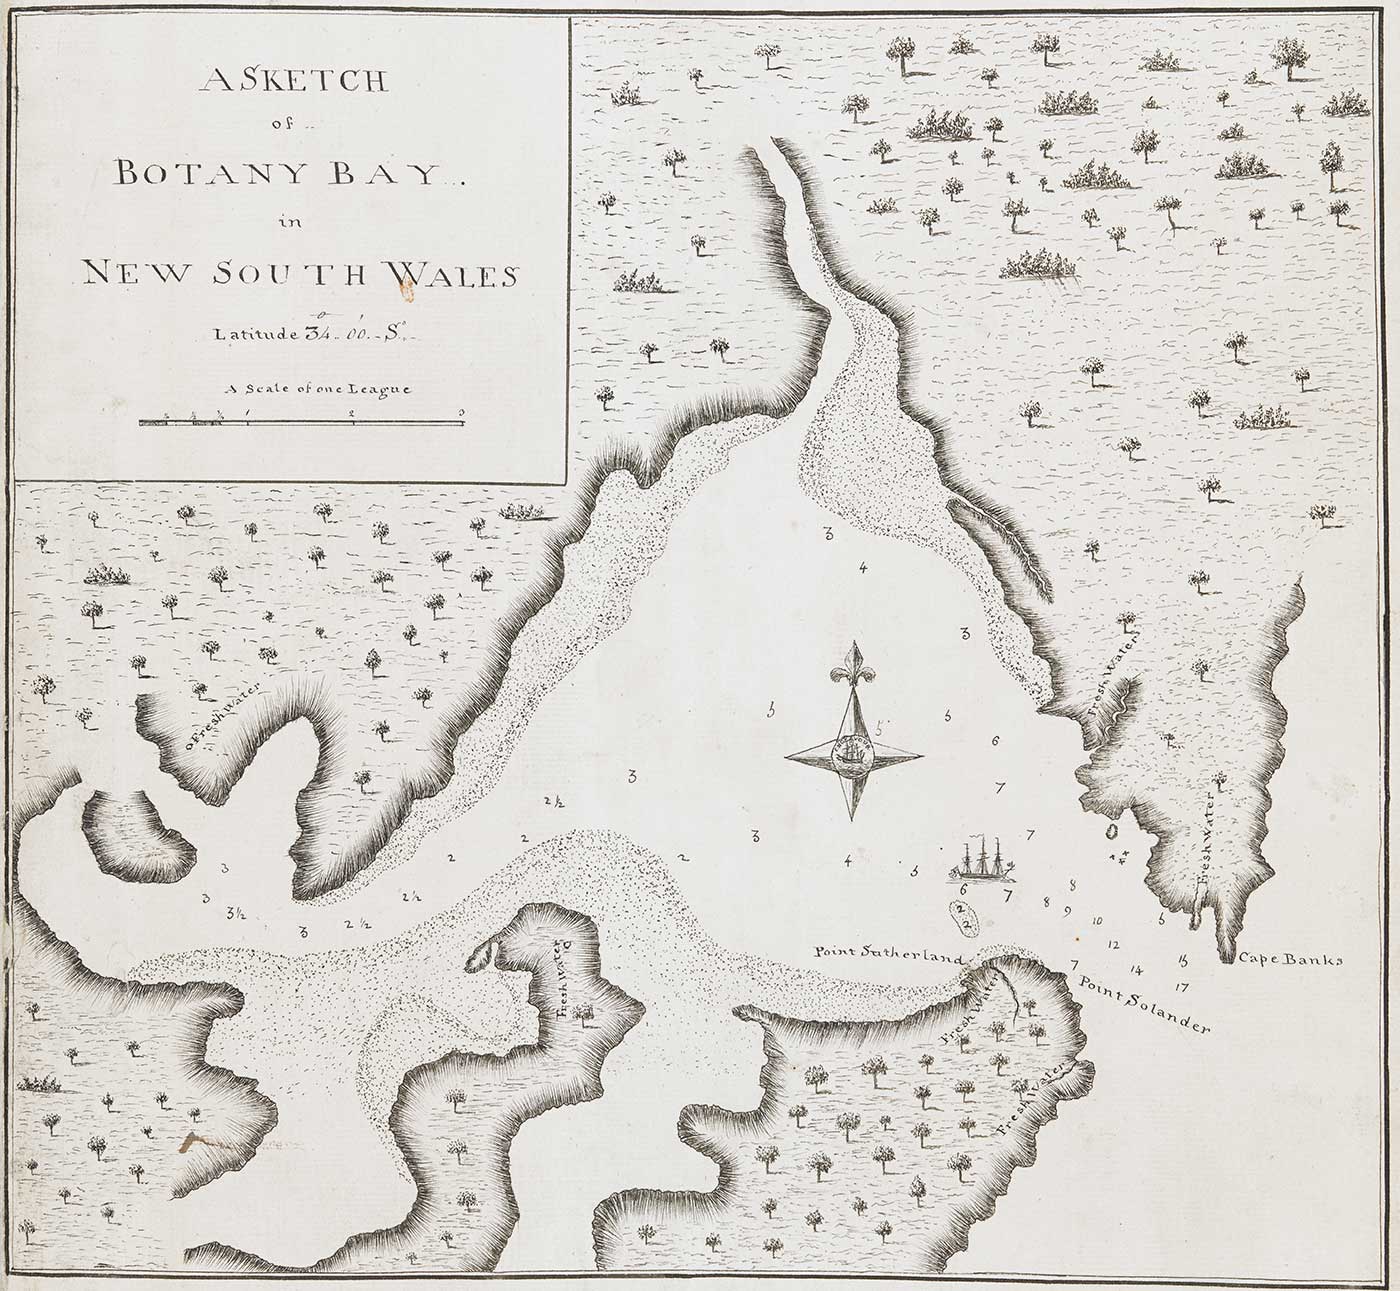 A map of Botany Bay in New South Wales which features illustrations of landmass with trees and coastal edges surrounding a bay. There is a sketch of a ship in the bay and numbers surrounding it. At the mouth of the bay is the text ‘POINT SUTHERLAND, POINT SOLANDER AND CAPE BANKS’. - click to view larger image